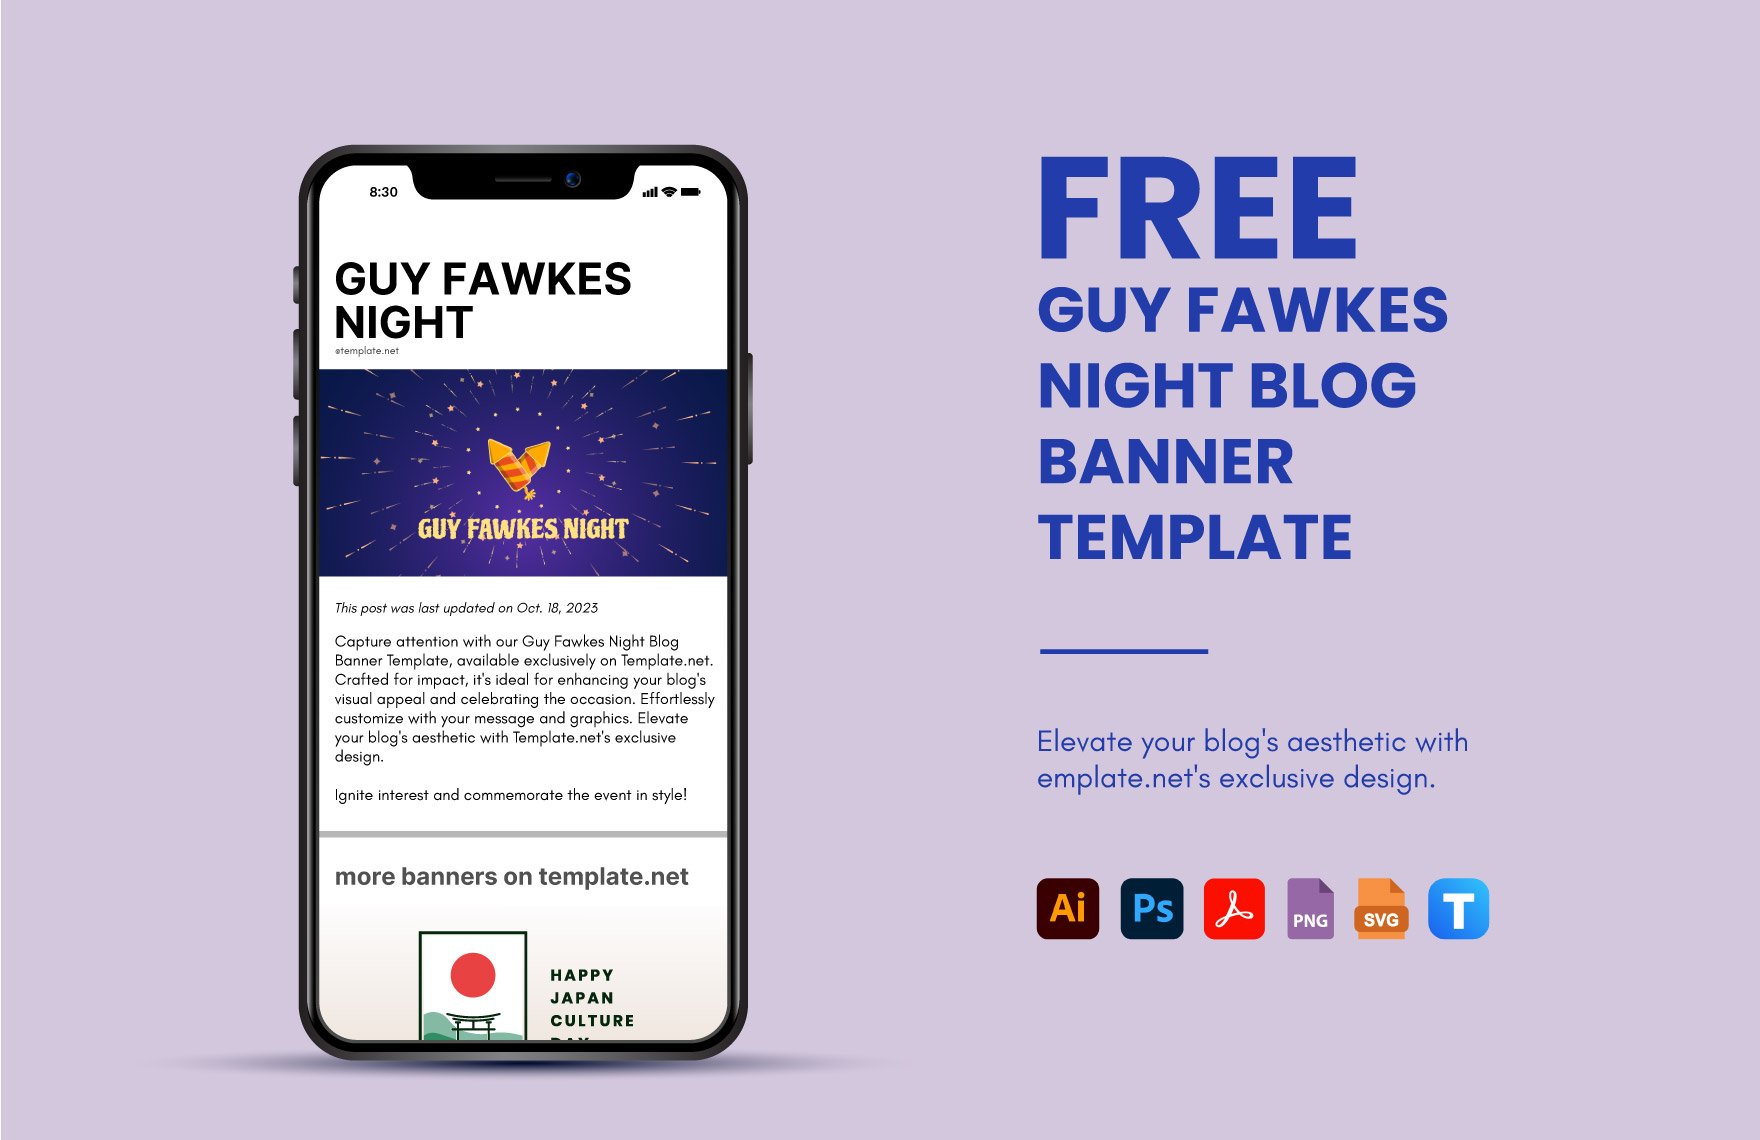 Free Guy Fawkes Night Blog Banner Template in PDF, Illustrator, PSD, SVG, PNG